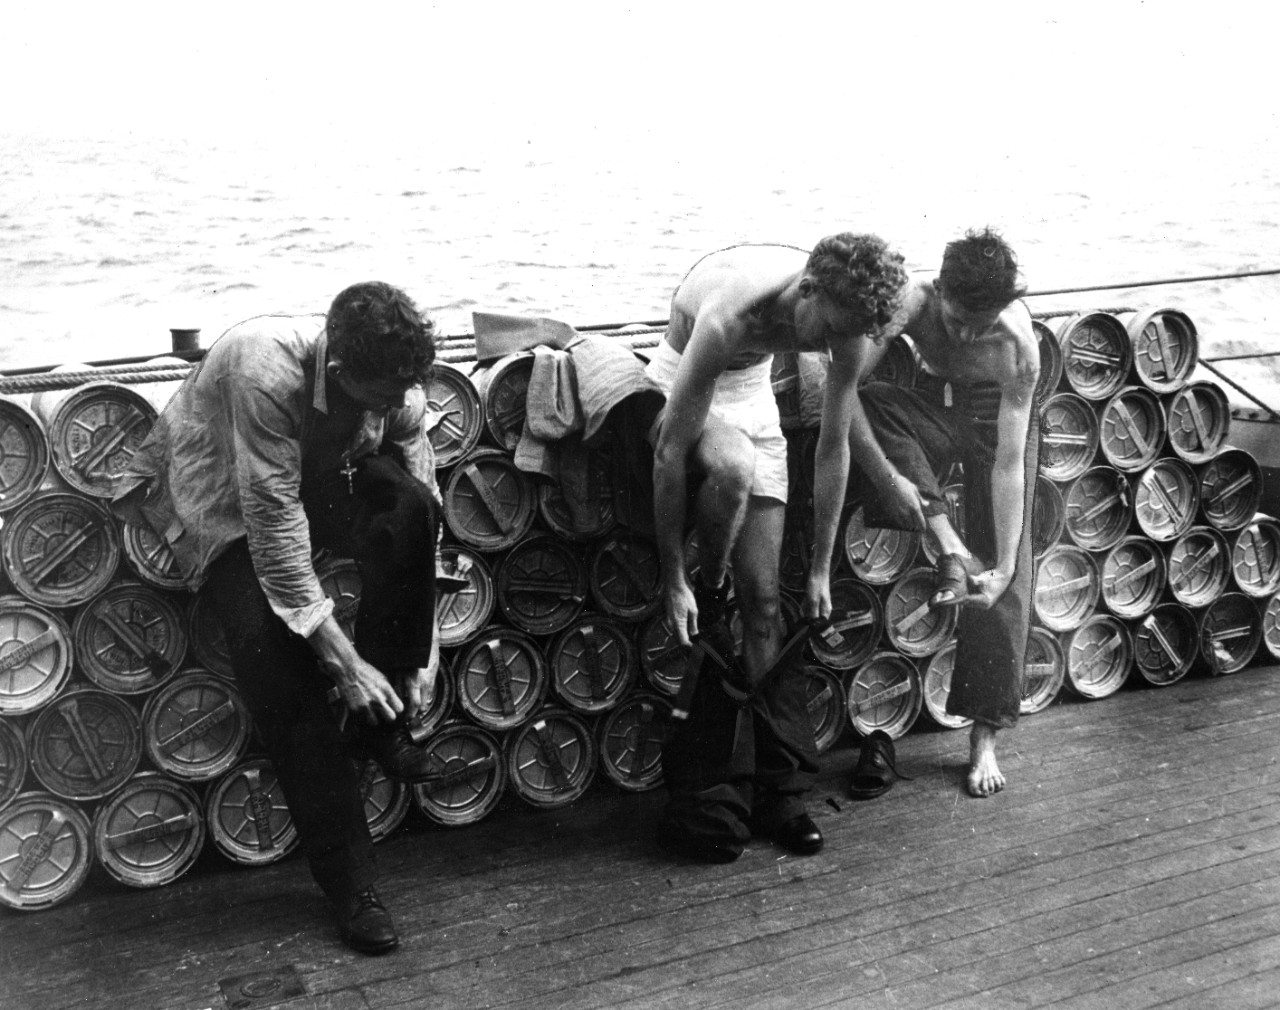 Given a new outfit of gear, survivors of the torpedoed USS Helena (CL-50) effect a change of ensemble aboard the warship which rescued them. They are (left to right) Fireman First Class Robert O. Dudley of Placerville, CA; Machinist's Mate Second Class Glenn B. Carlton of Huntington Park, CA; and Paul L. Benson of Council Bluffs, IA.